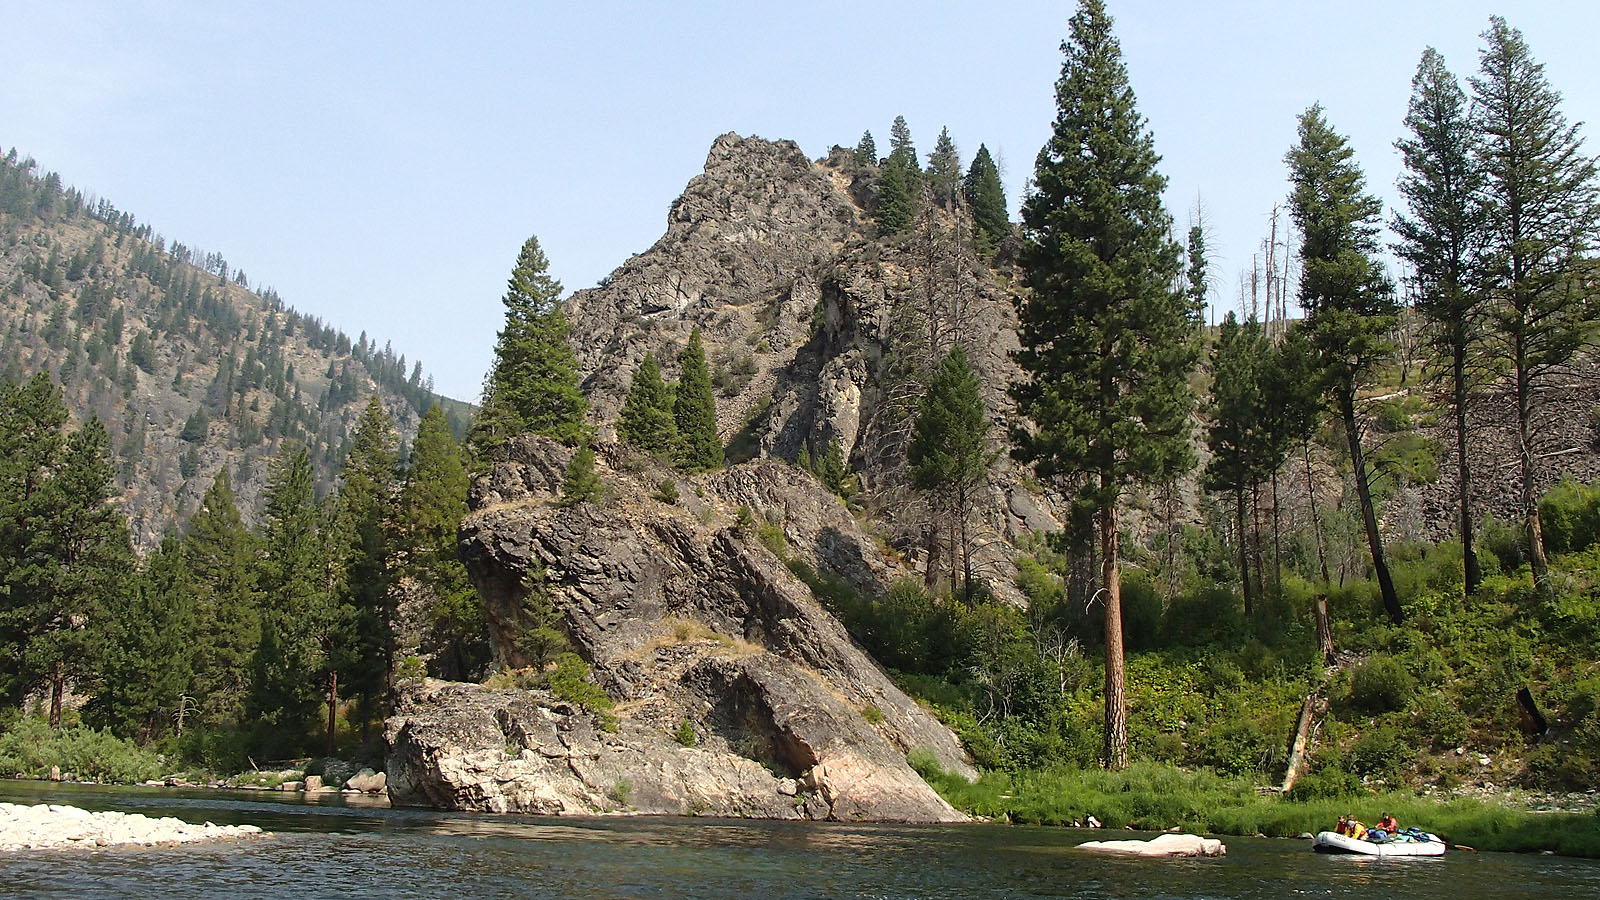 floating along the Middle Fork of the Salmon River in Idaho